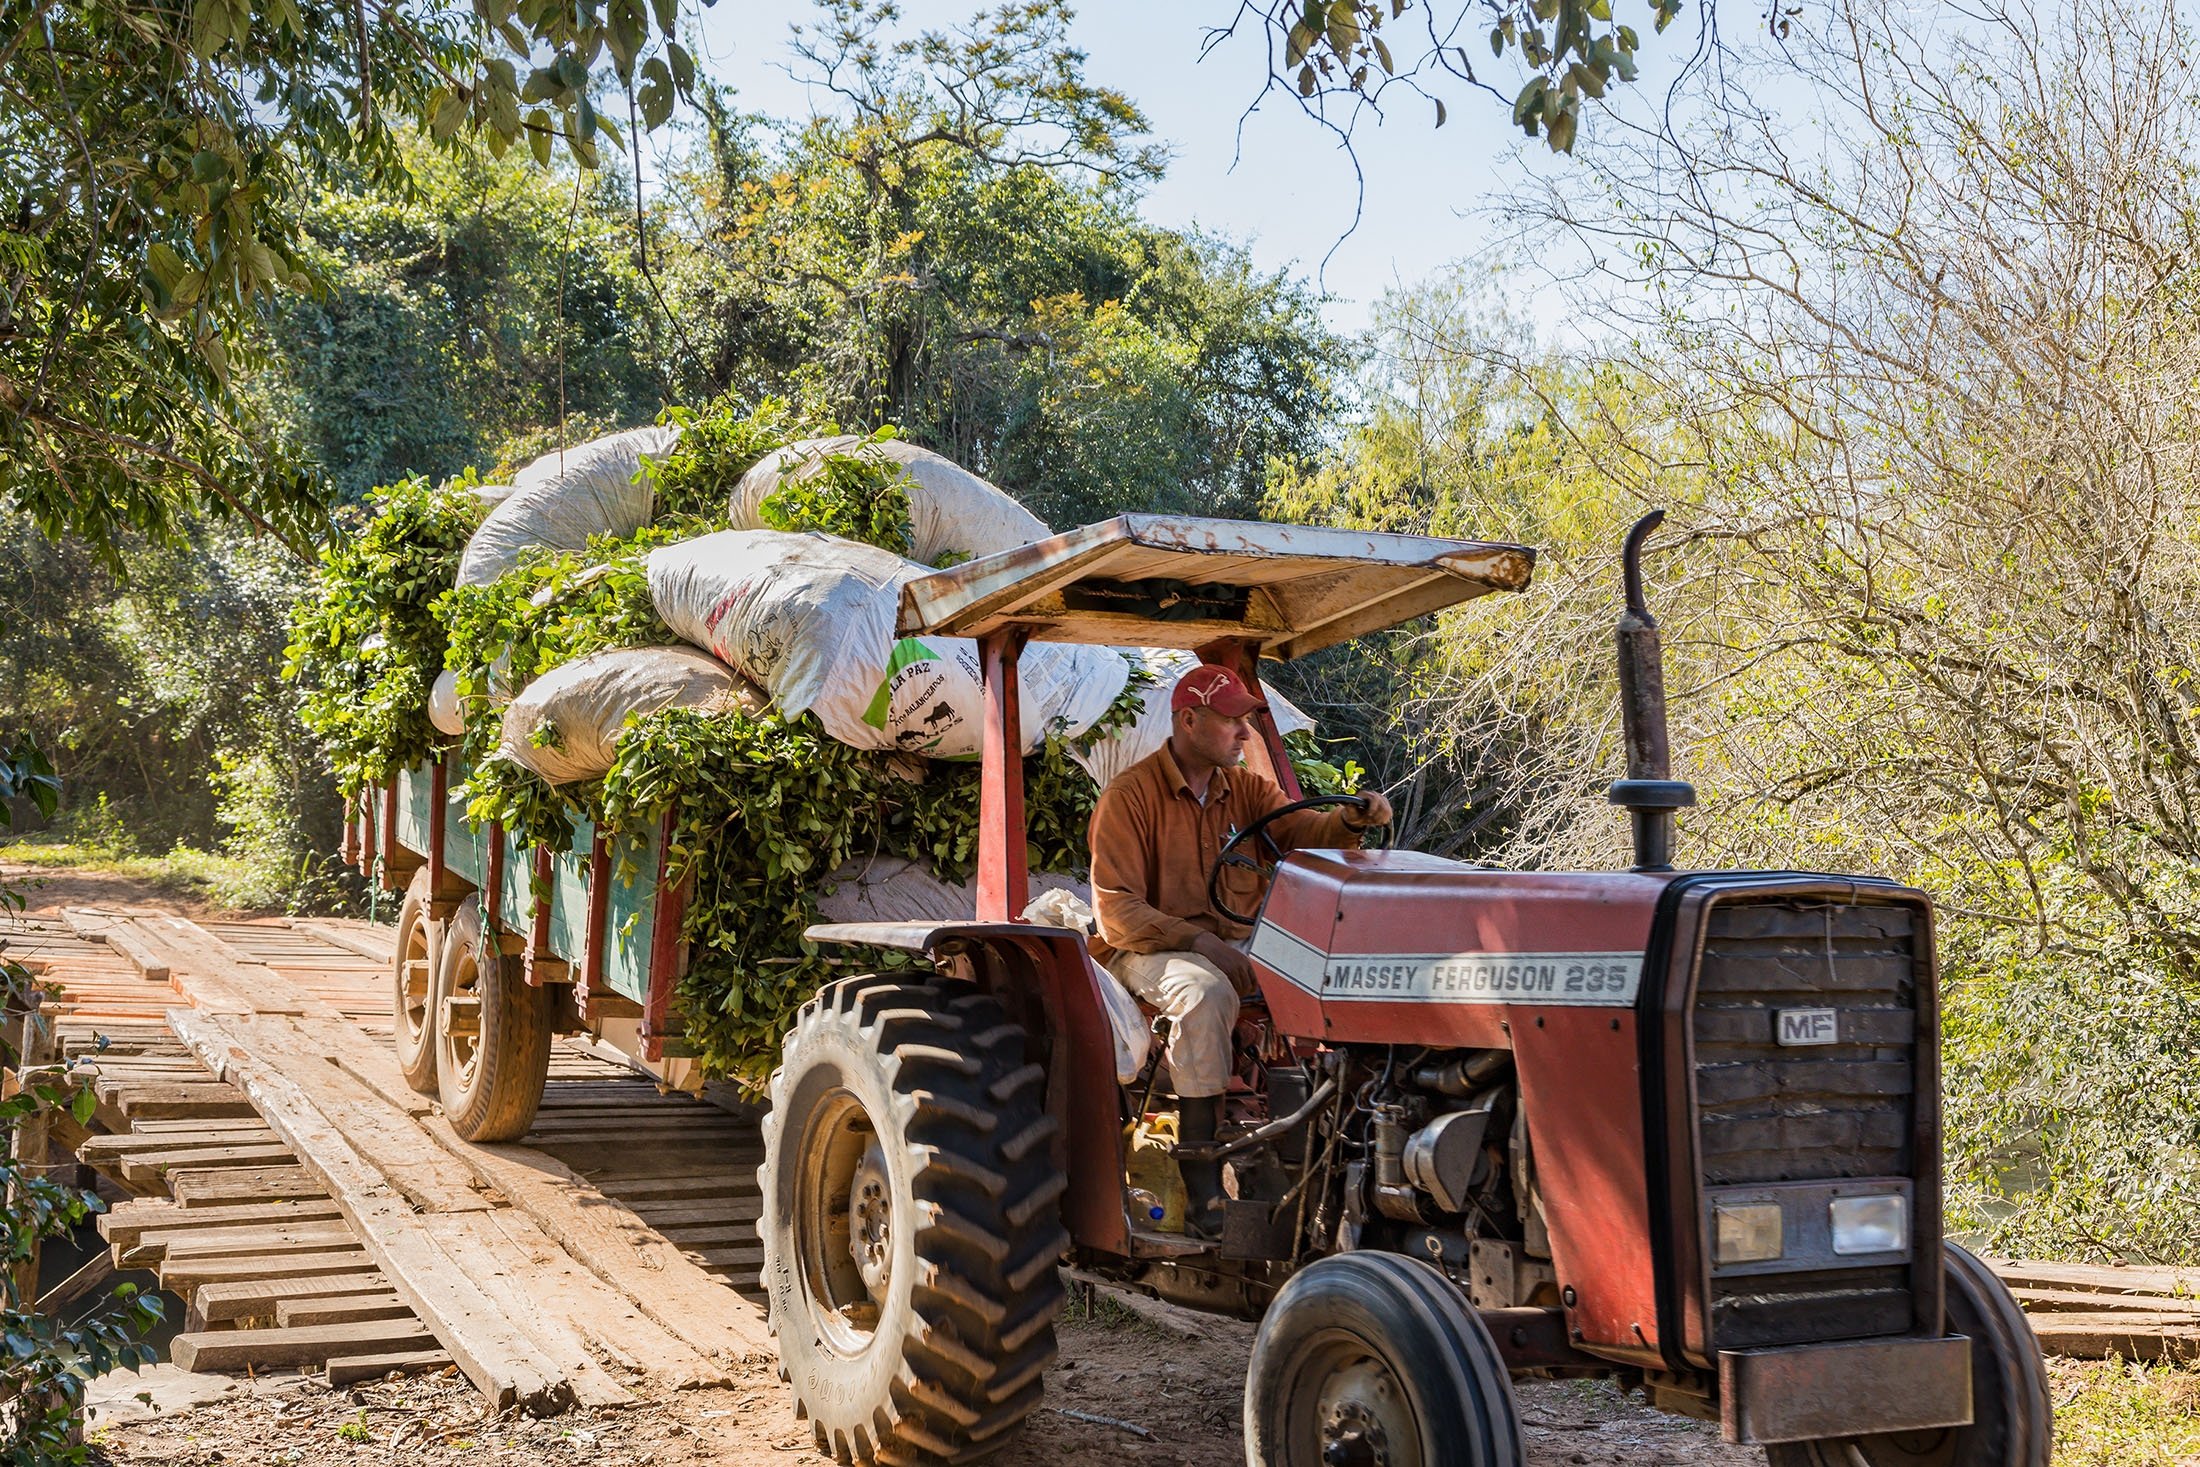 A farmer drives a tractor over a winding wooden bridge, in Colonia Independencia, Paraguay, June 20, 2018. (Shutterstock Photo)